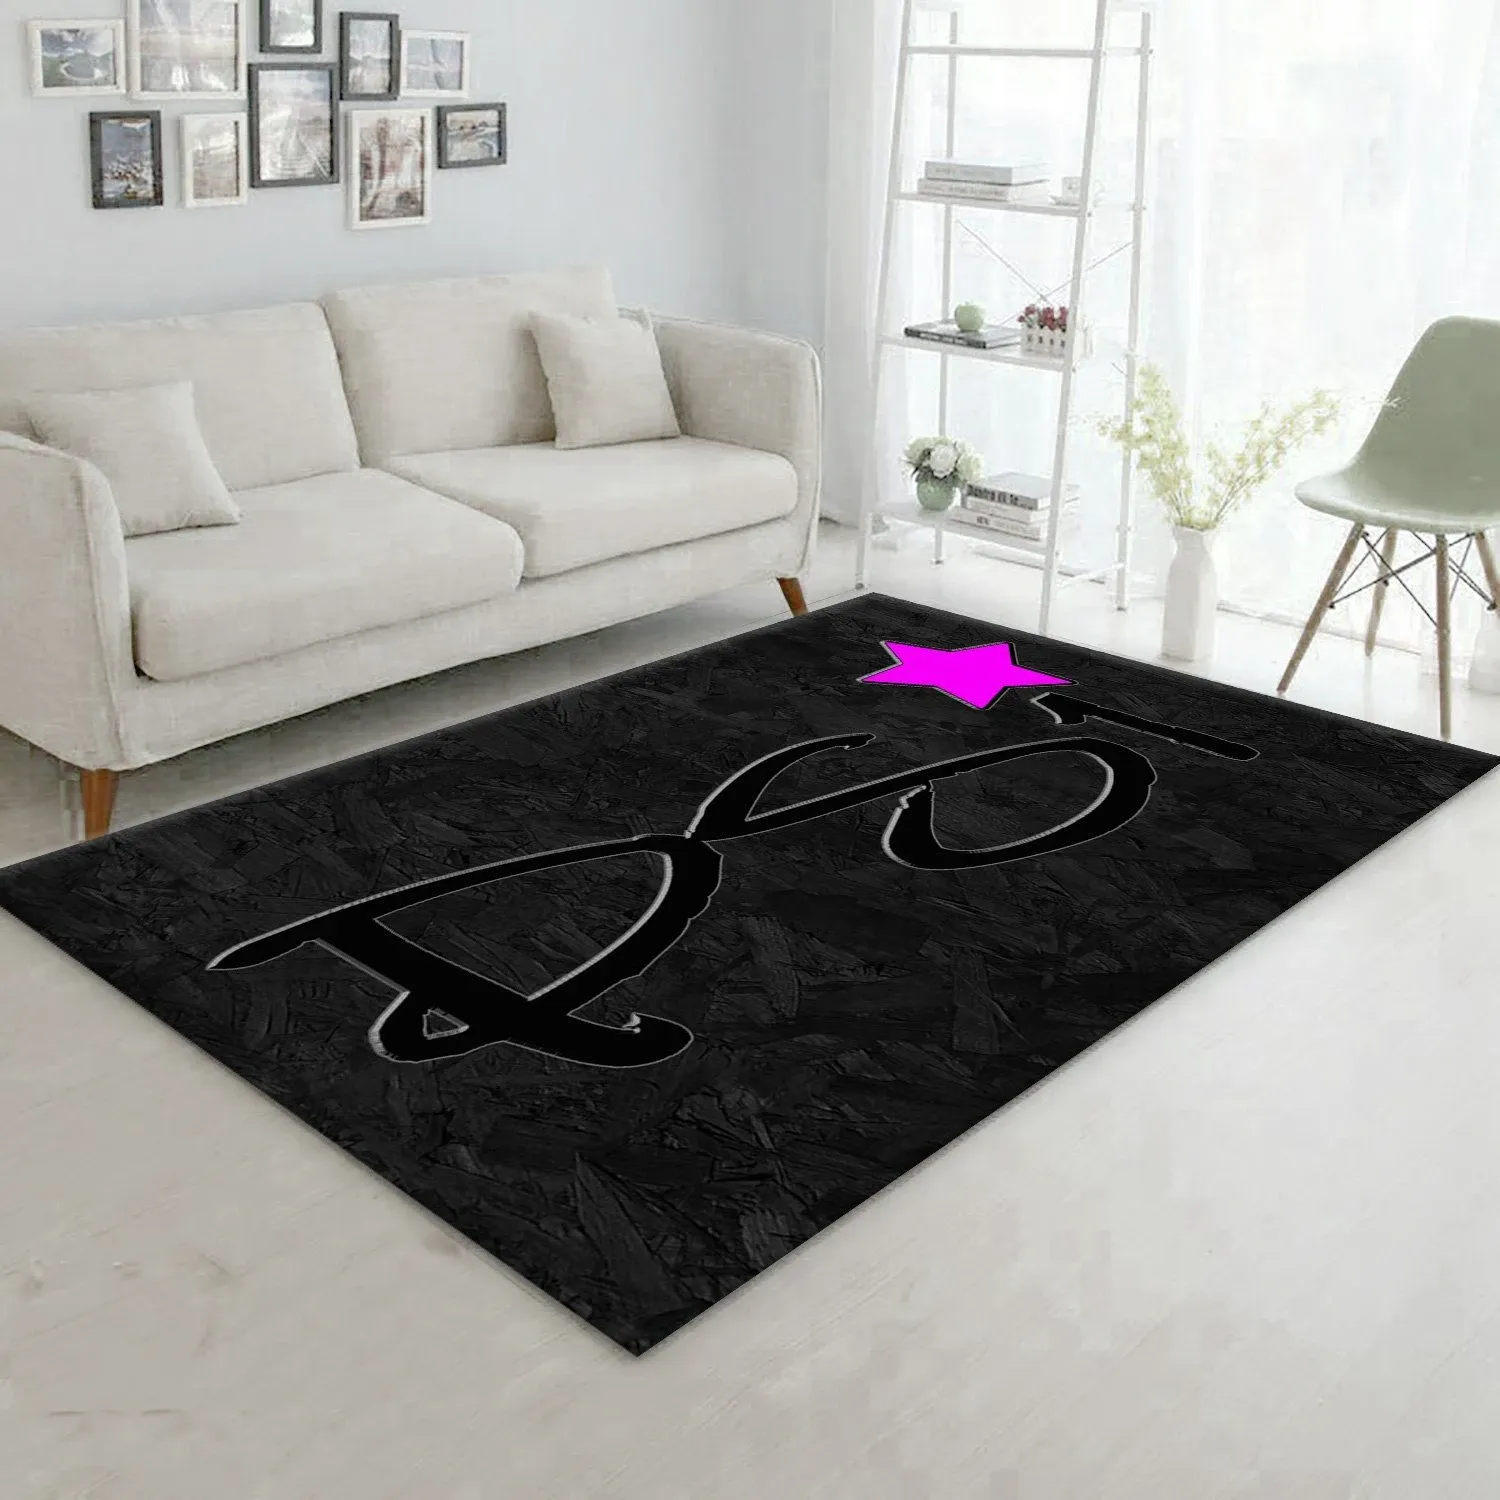 Psi Audio Ver1 Area Rug For Christmas Living Room Rug Home US Decor - Indoor Outdoor Rugs 2